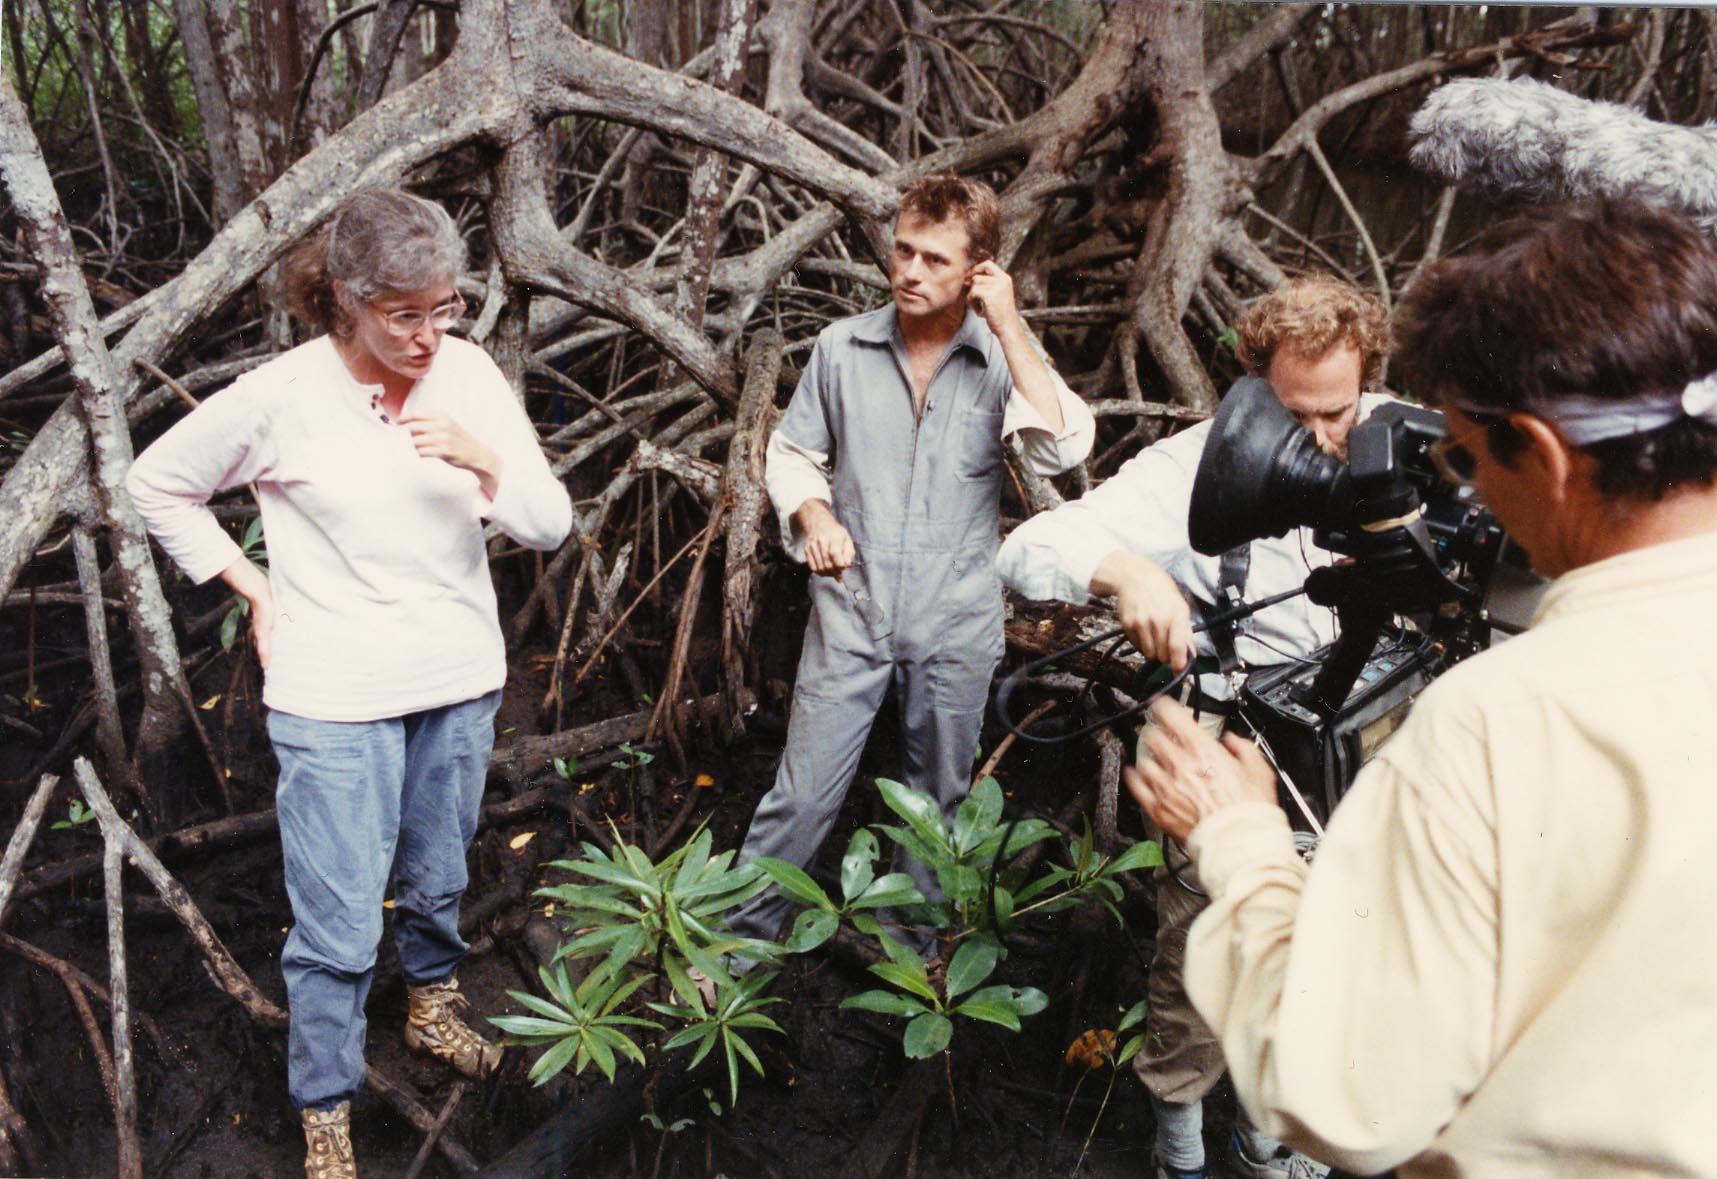 Videohistory interview at the Smithsonian Tropical Research Institute, 1990.